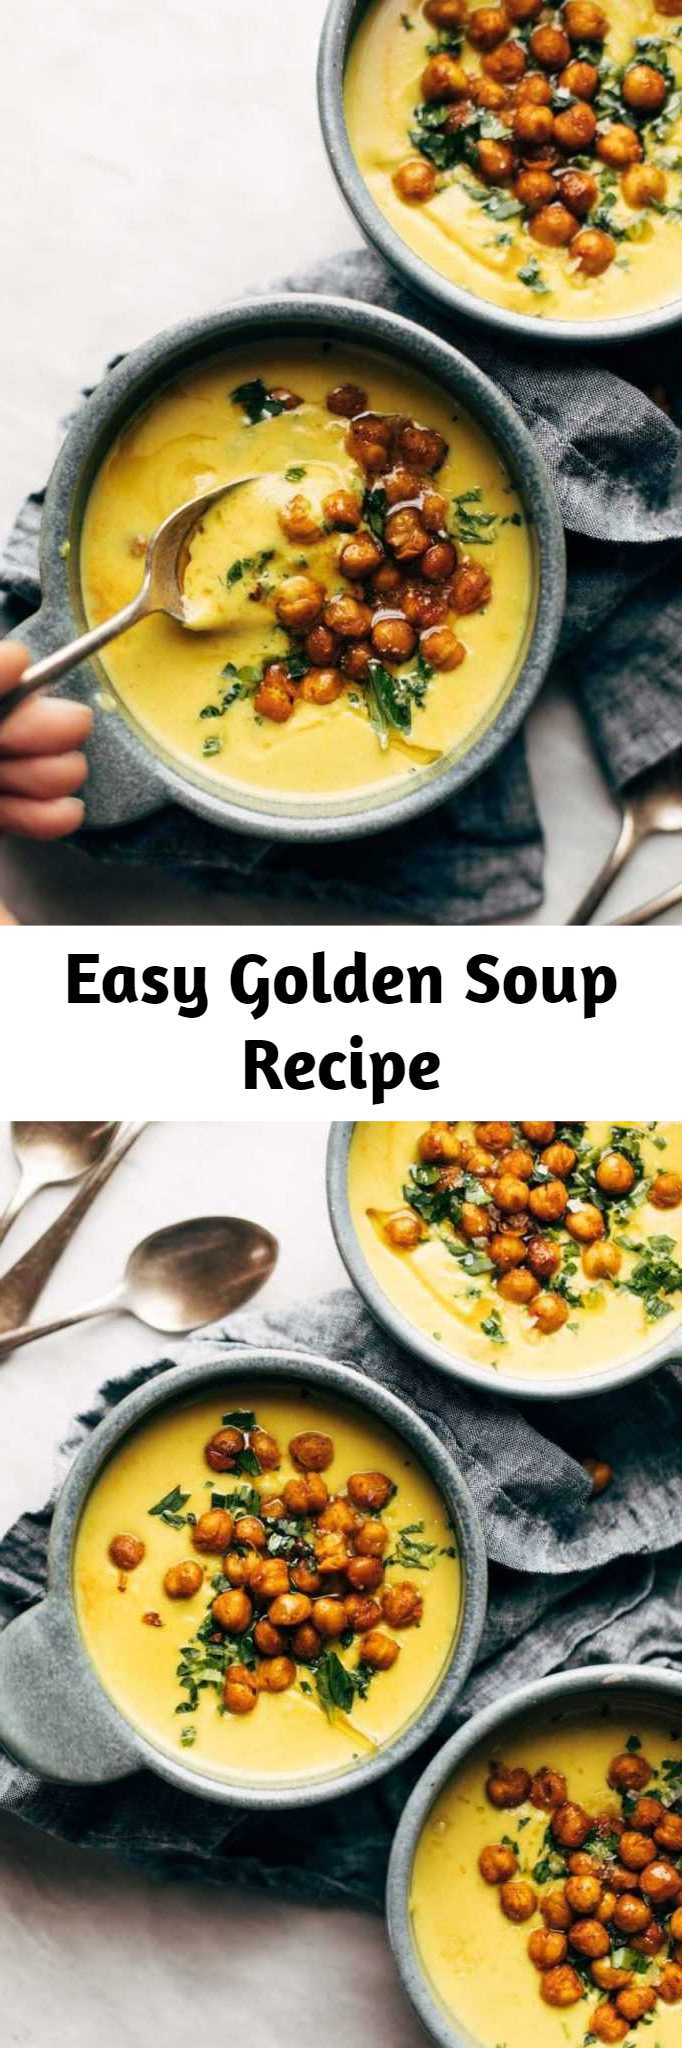 Easy Golden Soup Recipe - Cozy, bright, and healing with power-foods like turmeric, cauliflower, and cashews. Topped with crispy chickpeas. Super creamy and SO GOOD. #healthy #sugarfree #glutenfree #vegan #cleaneating #easyrecipe #soup